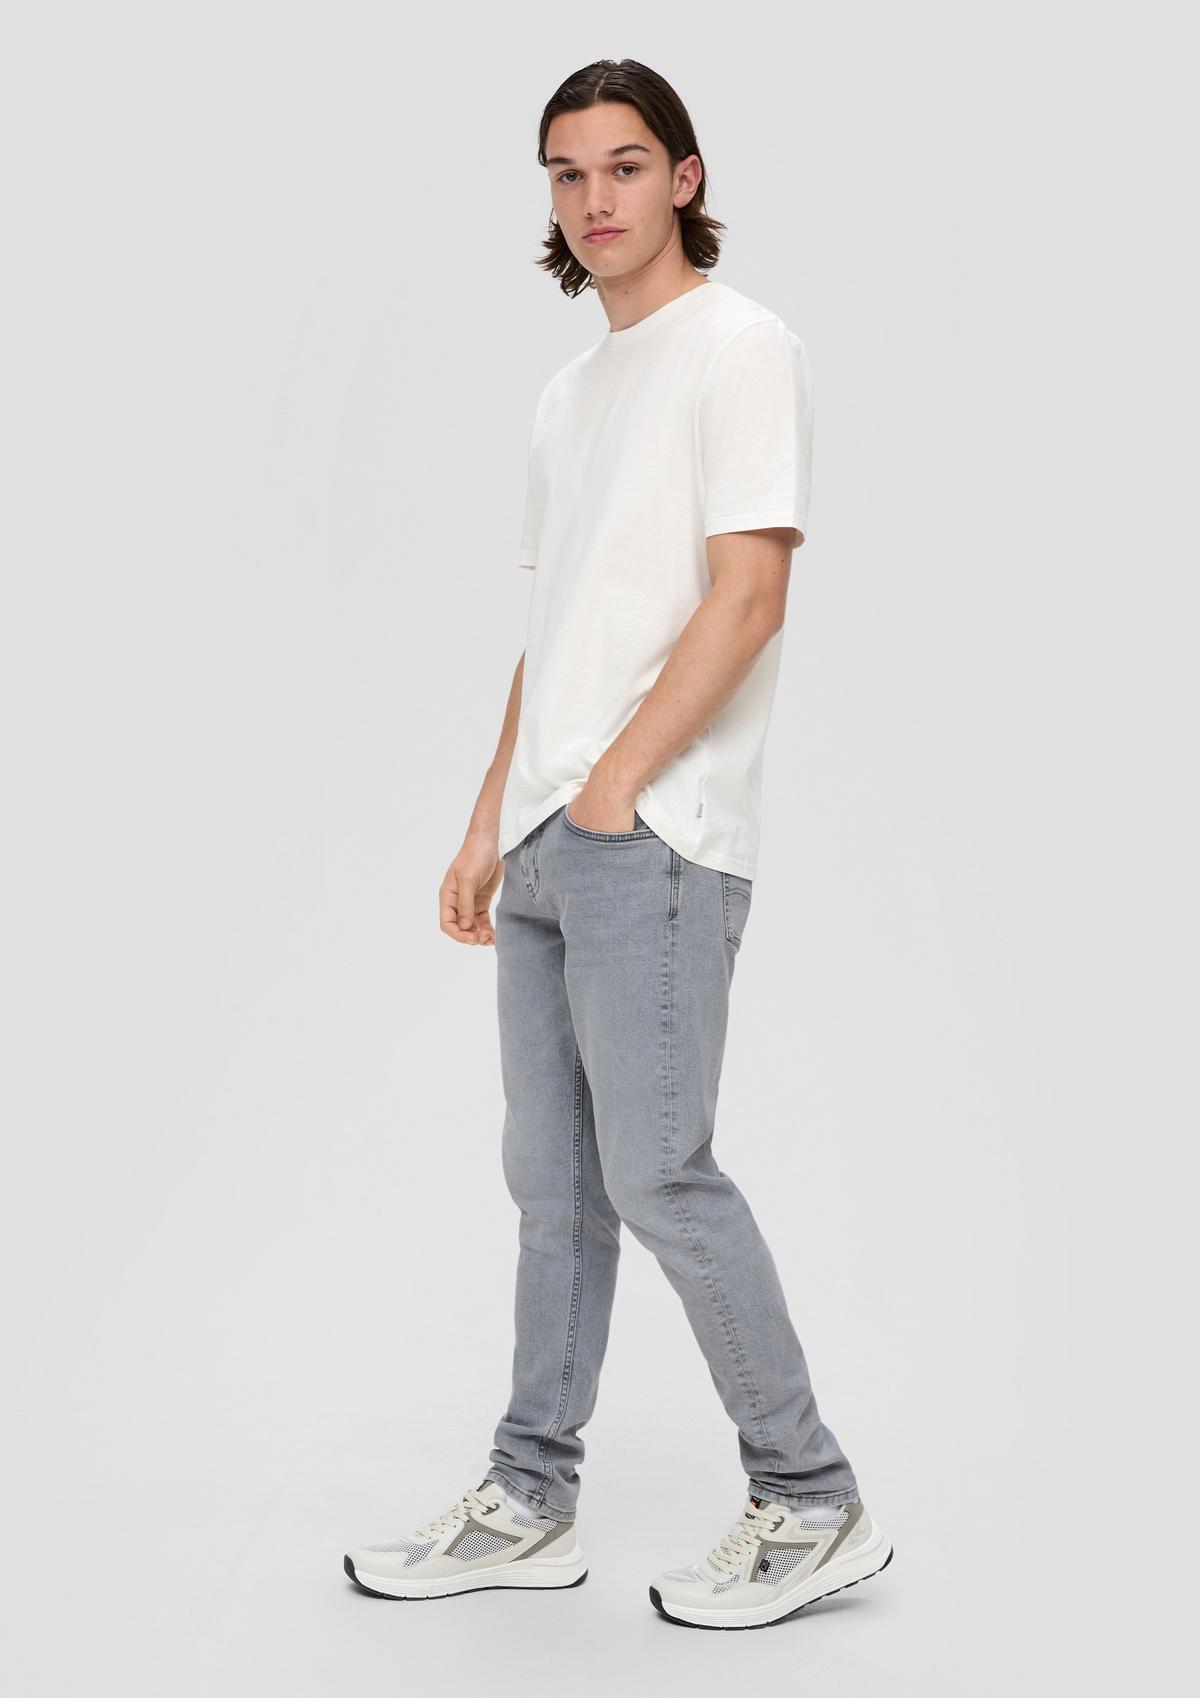 s.Oliver Shawn jeans / regular fit / mid rise / tapered leg